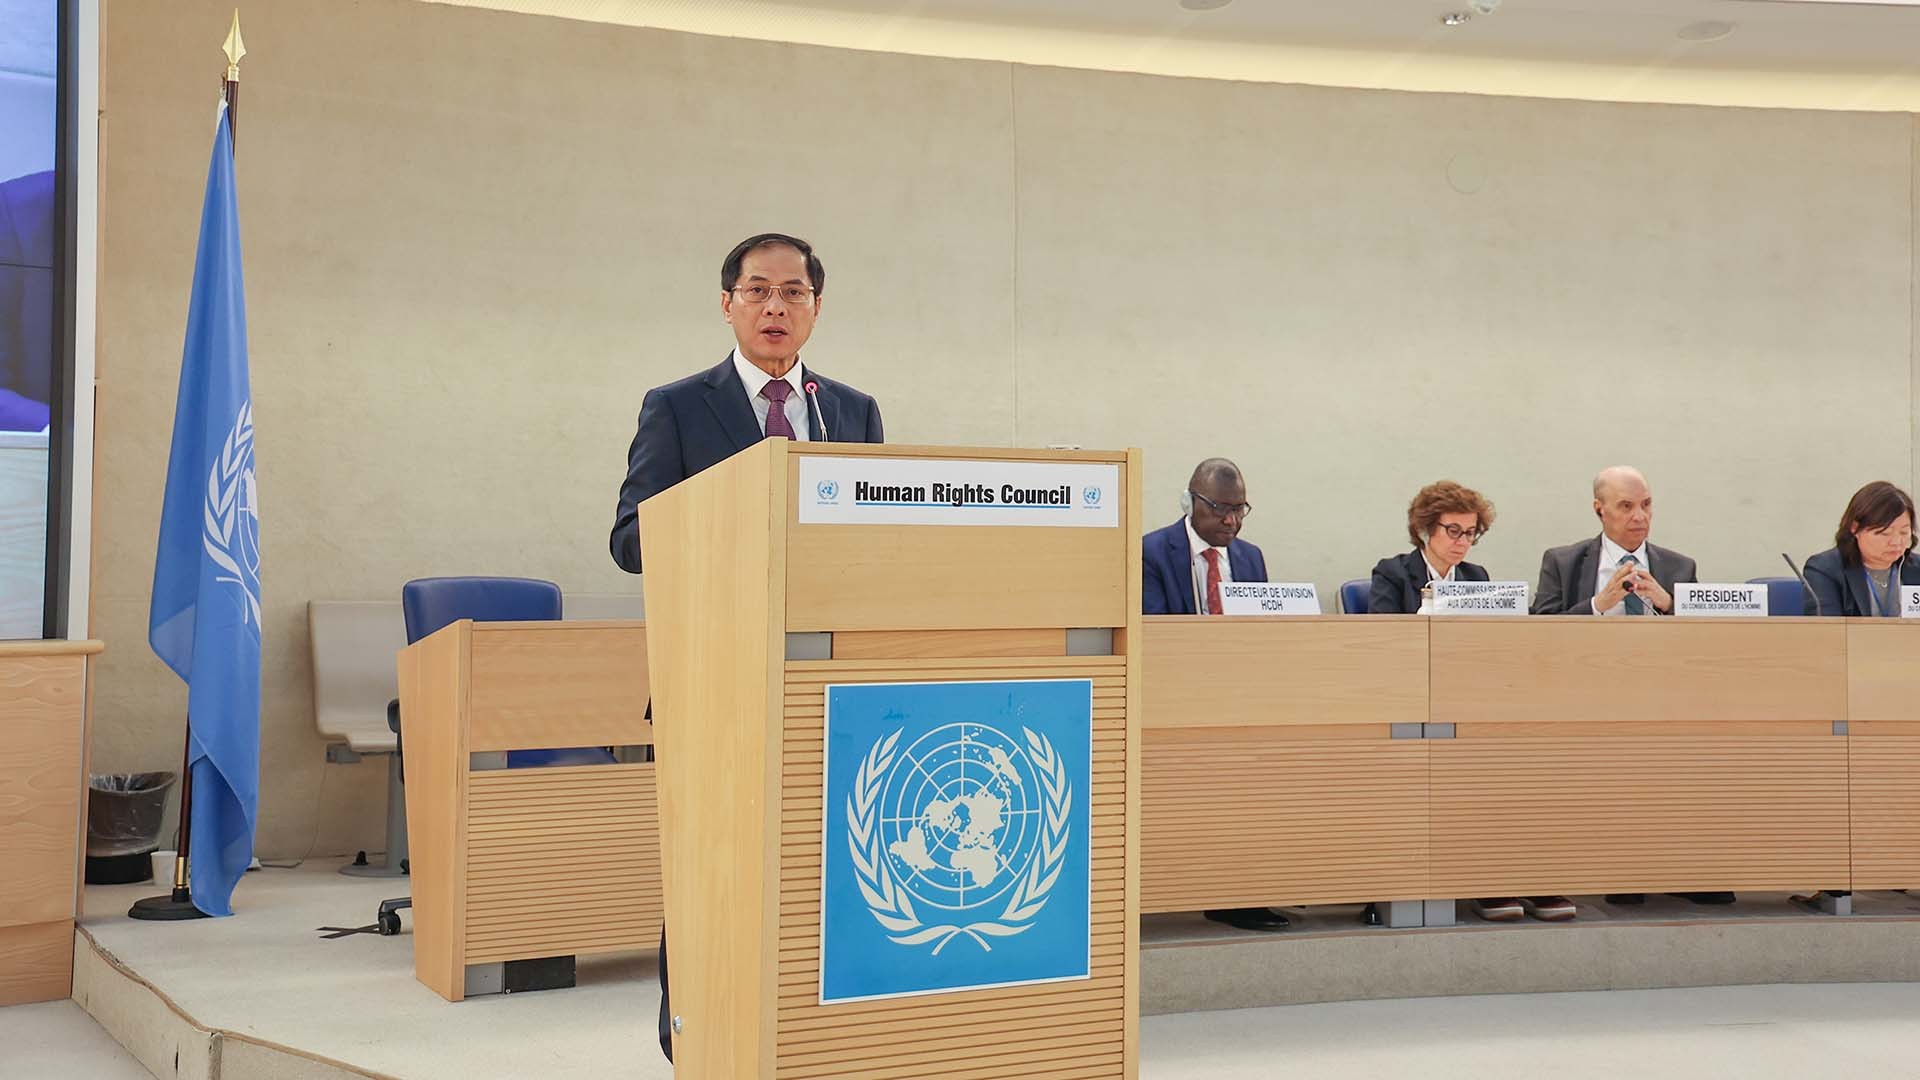 Minister Bui Thanh Son spoke at the High-Level Meeting of the 55th Session of the United Nations Human Rights Council, February 26 in Geneva, Switzerland. (Photo: Nhat Phong)